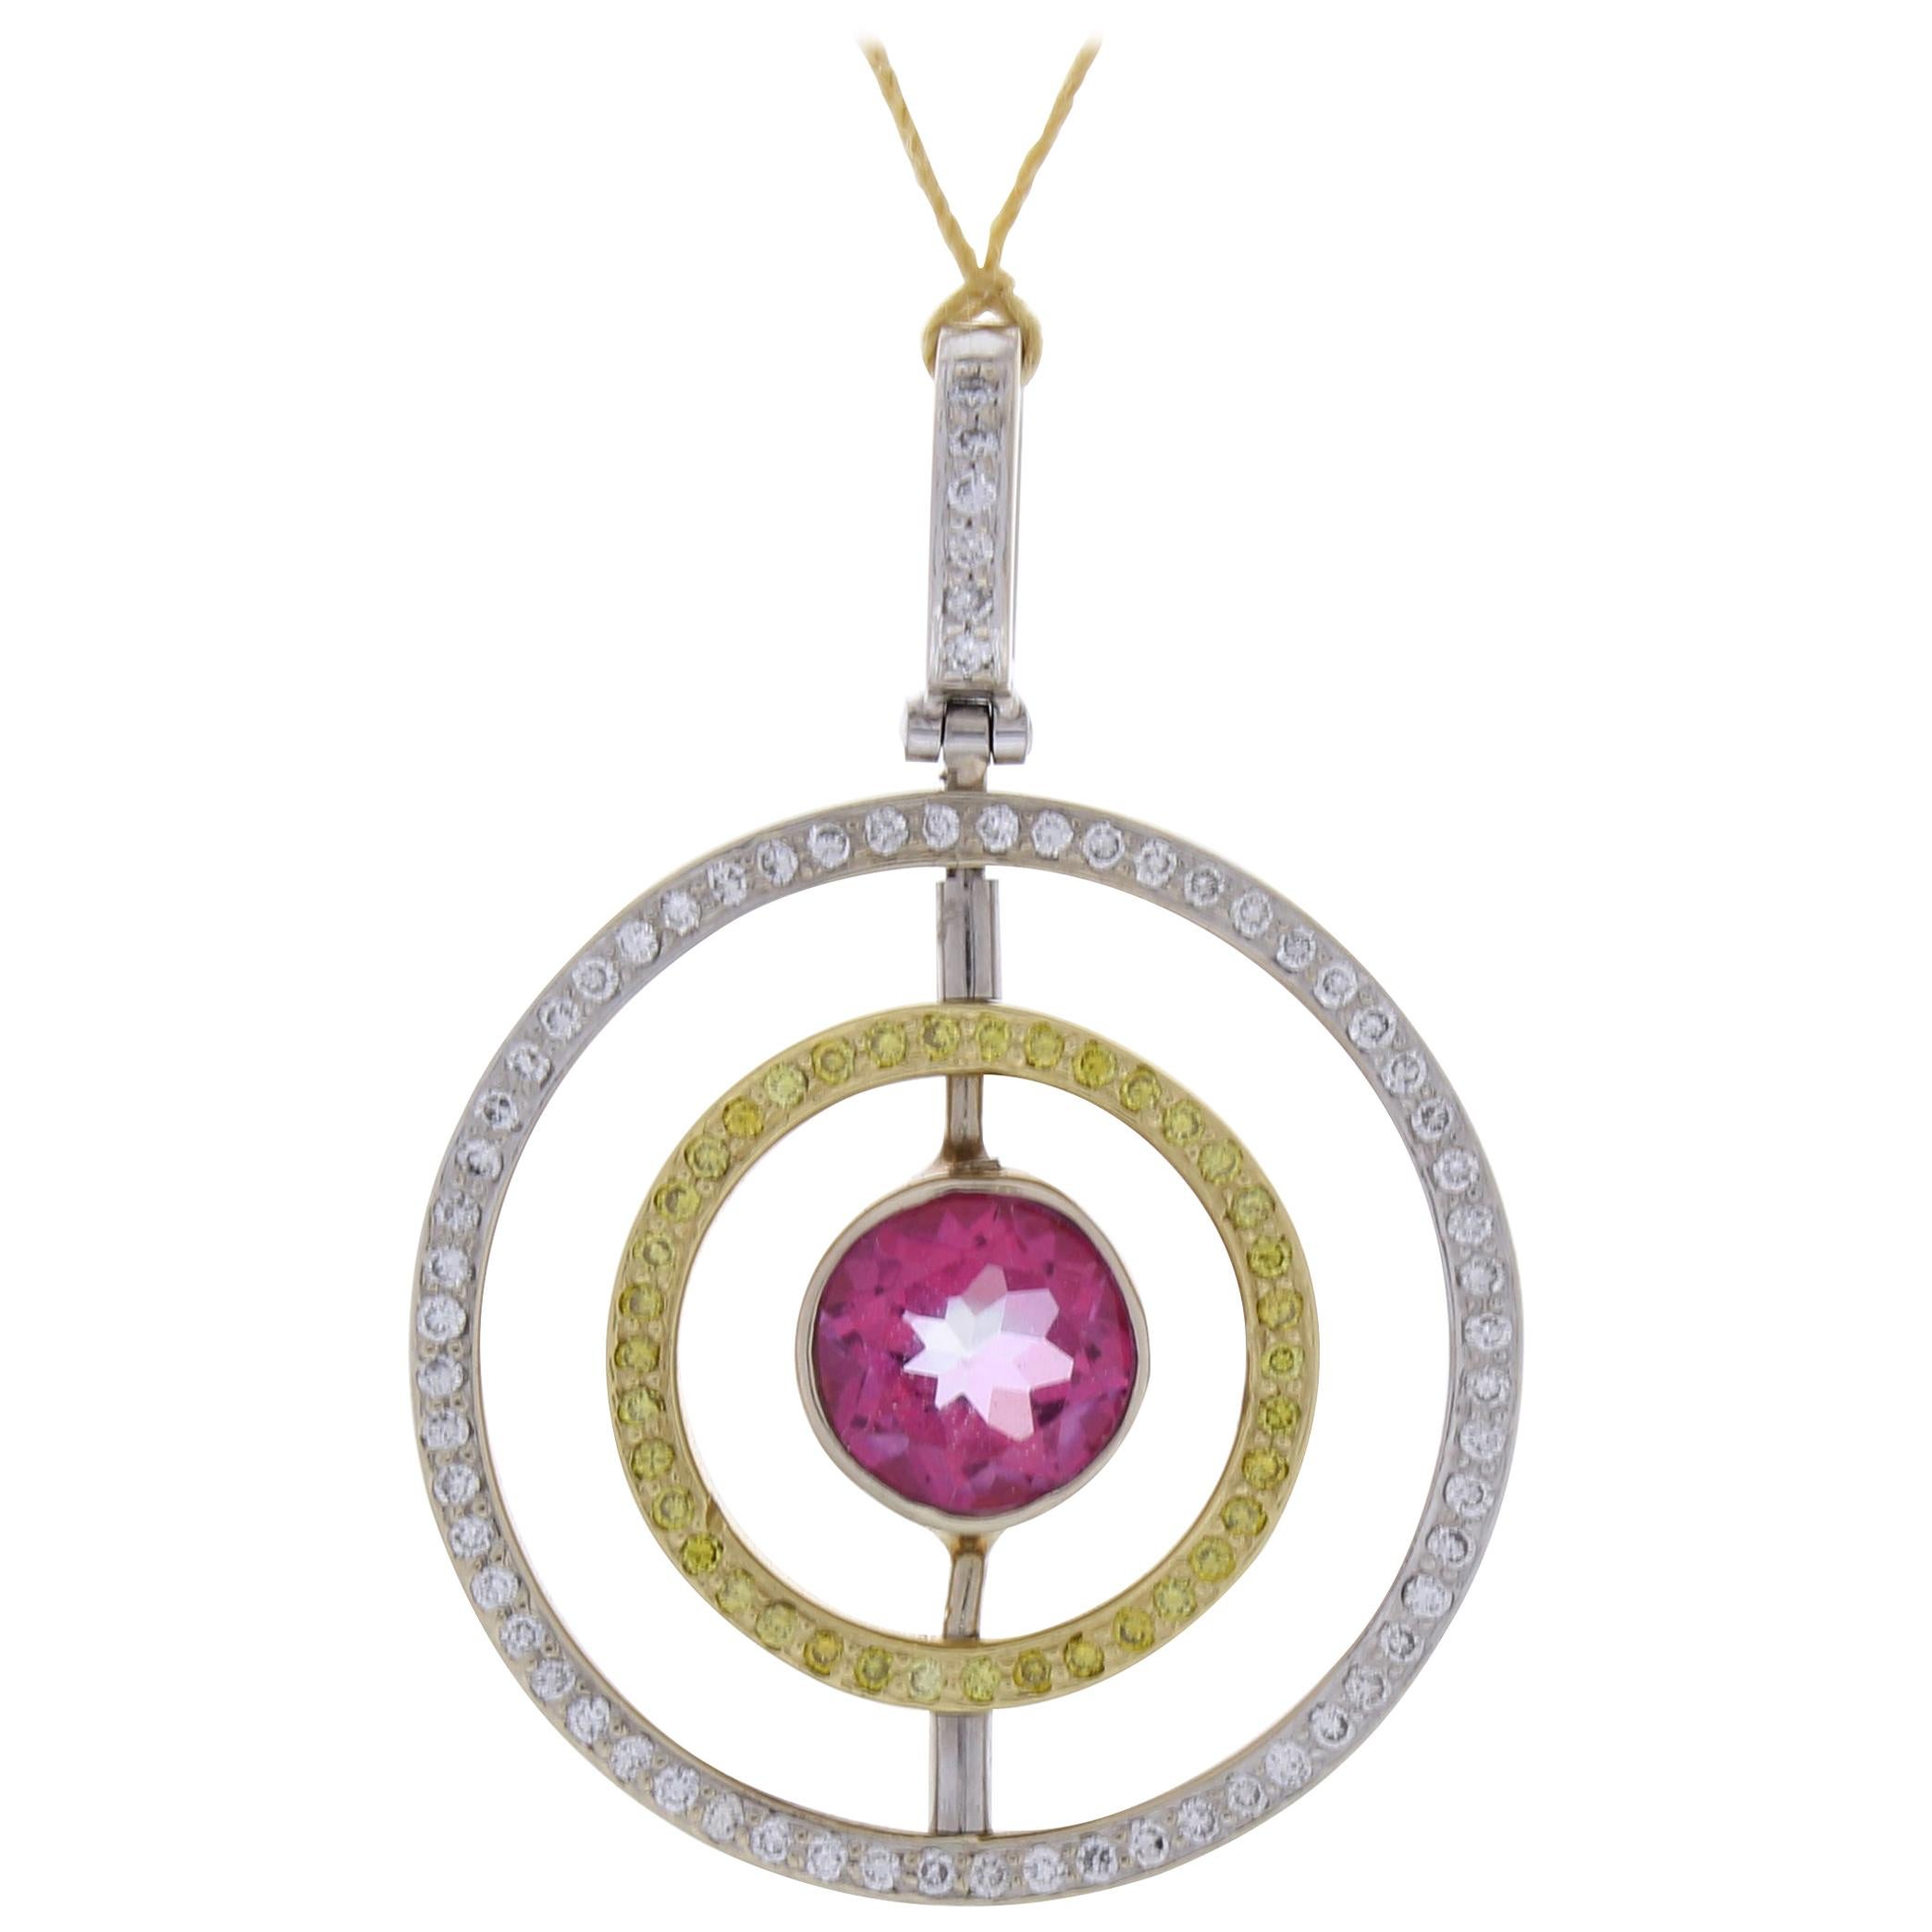 1.23 Carat Pink Tourmaline and Natural Colored Diamond Pendant in 18K Two Toned